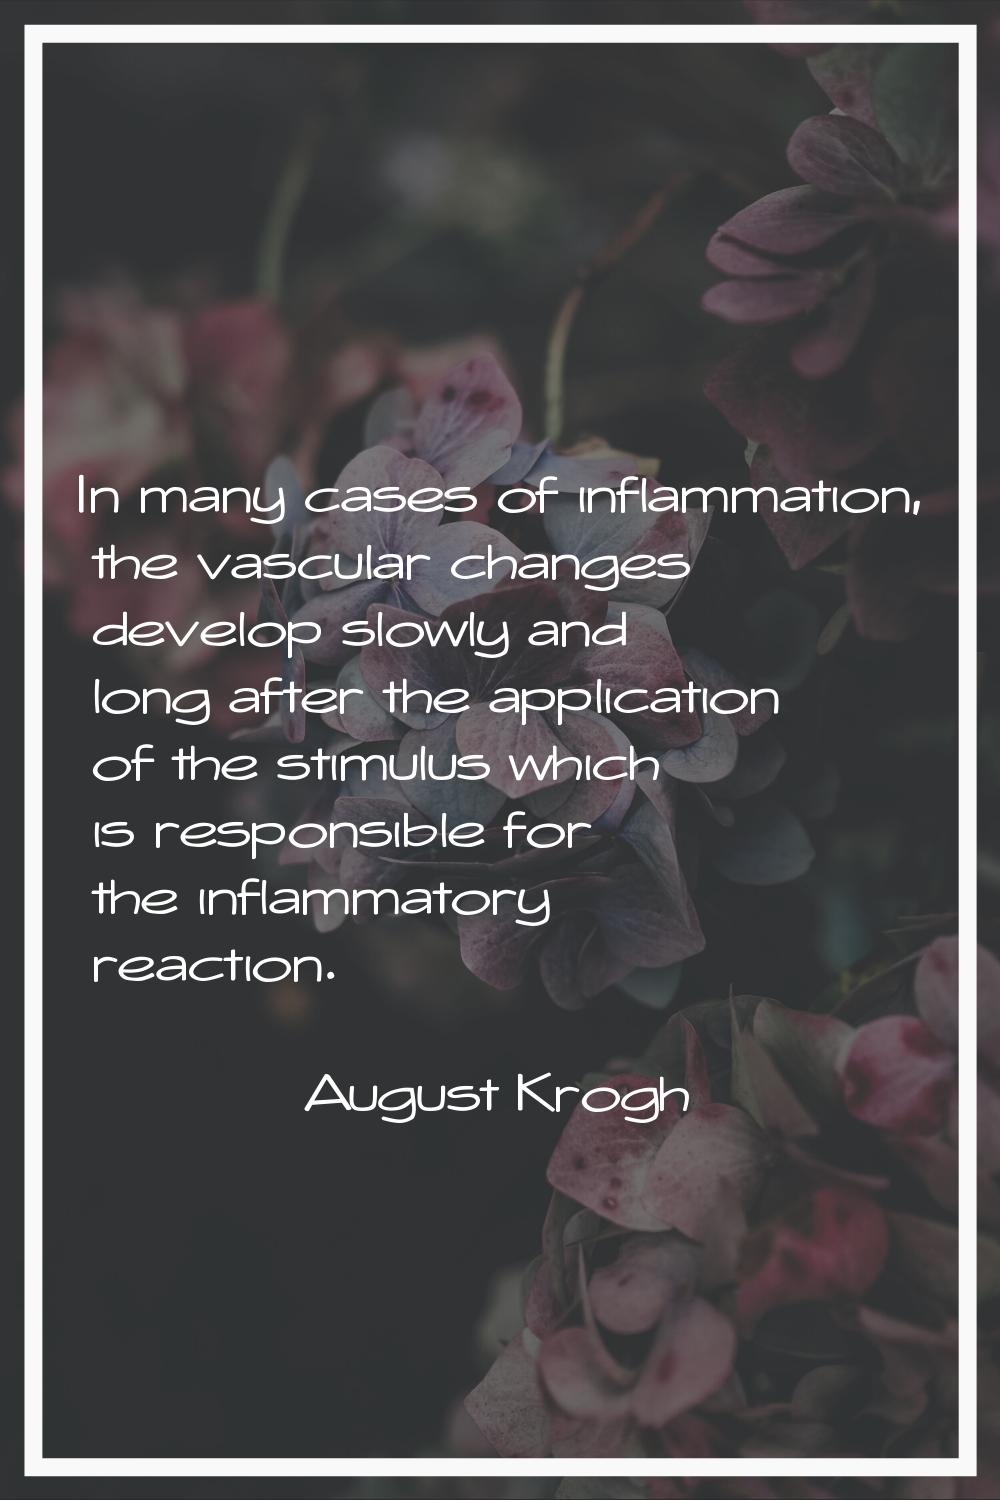 In many cases of inflammation, the vascular changes develop slowly and long after the application o